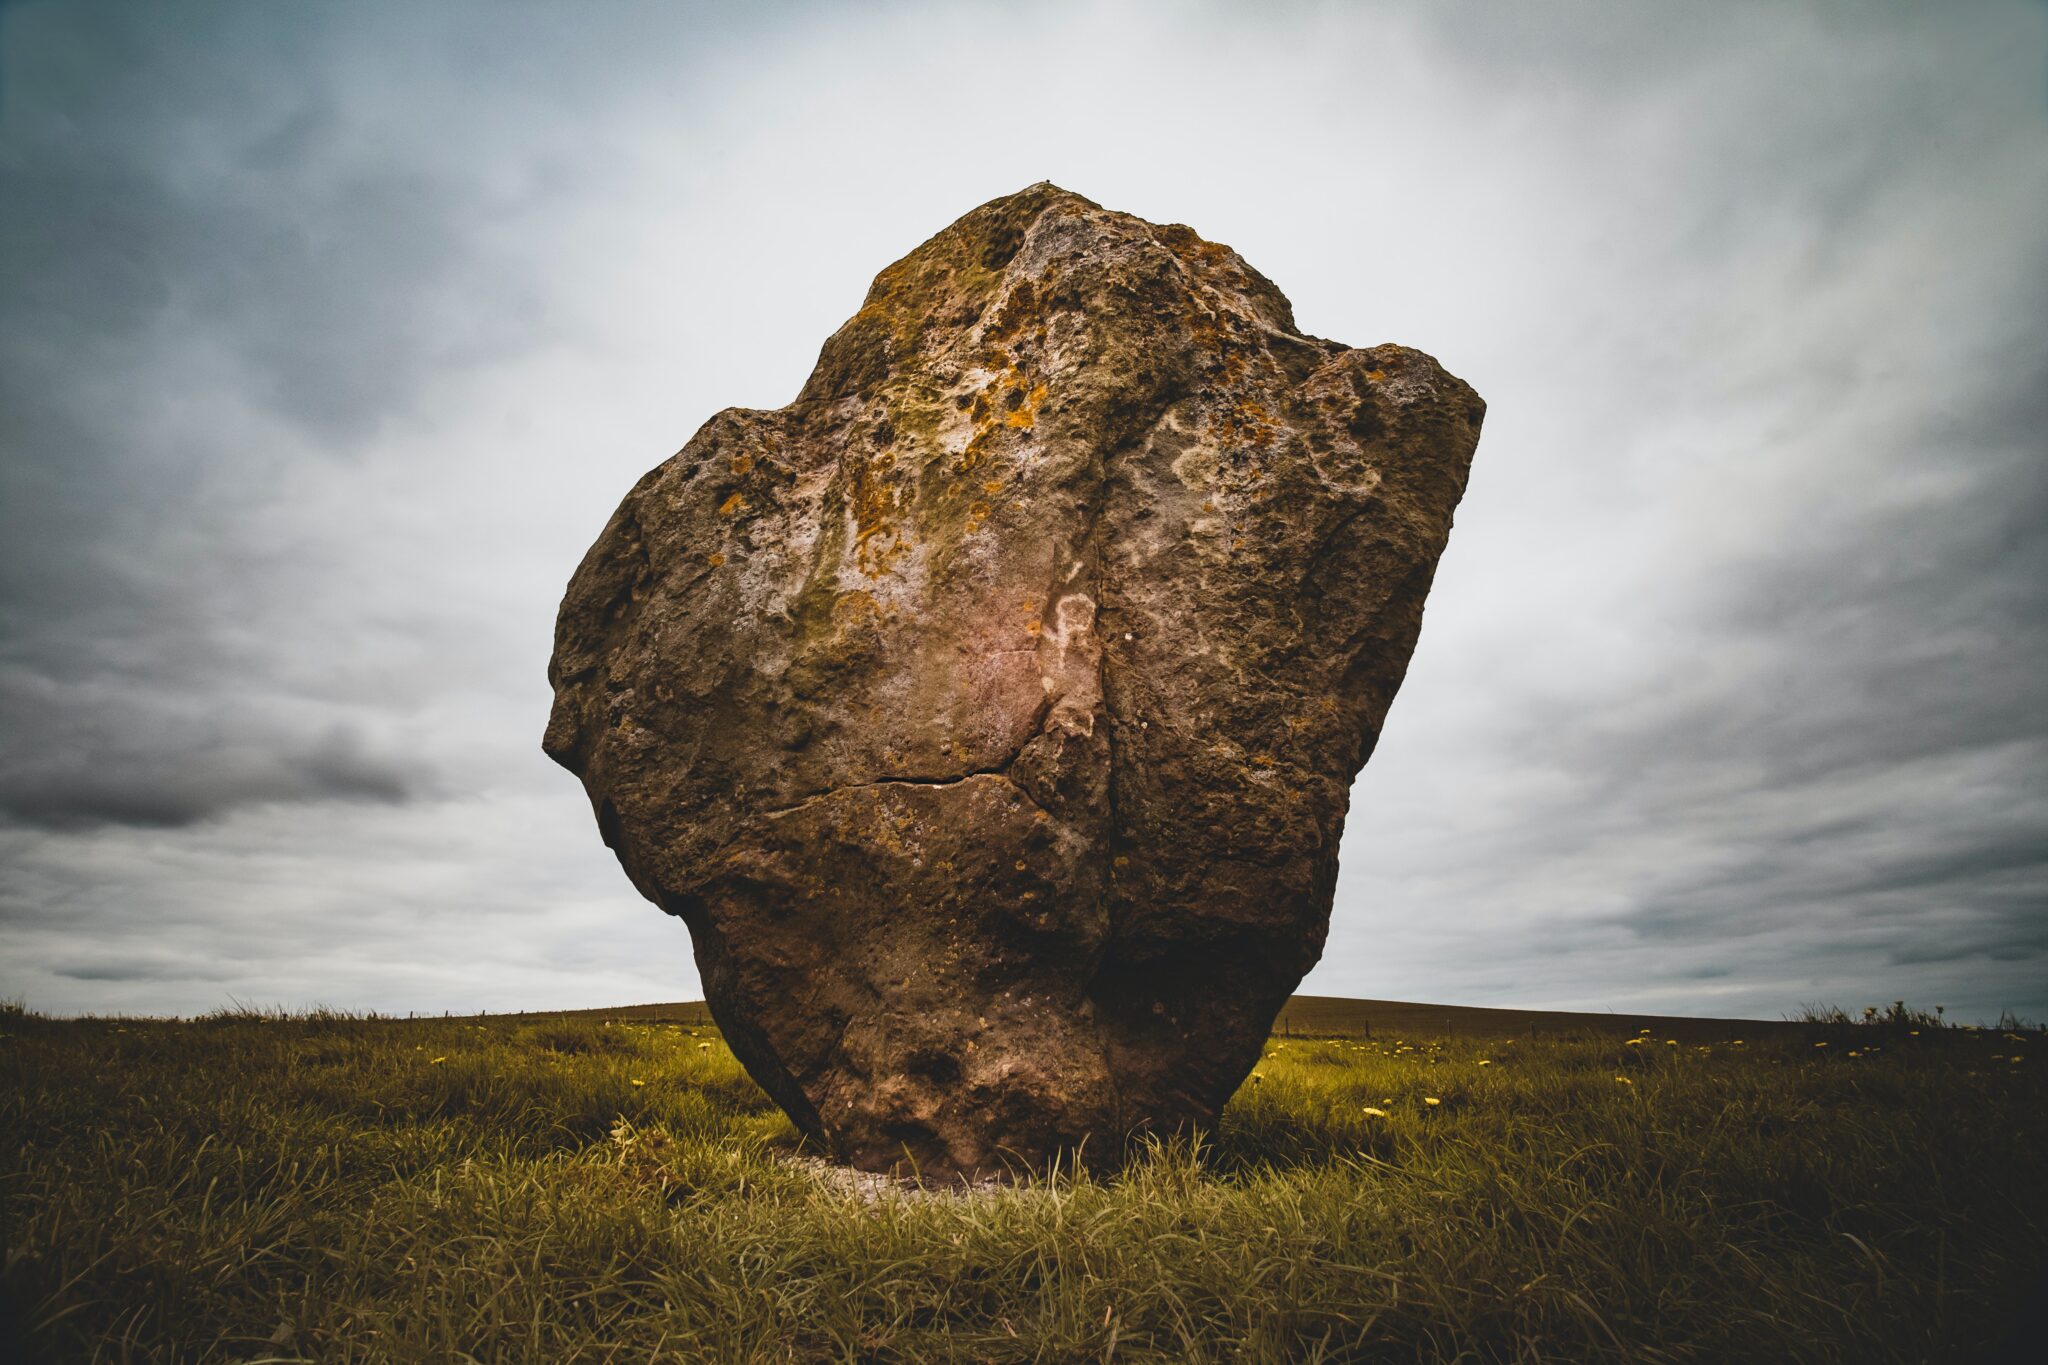 Large rock in a field of grass